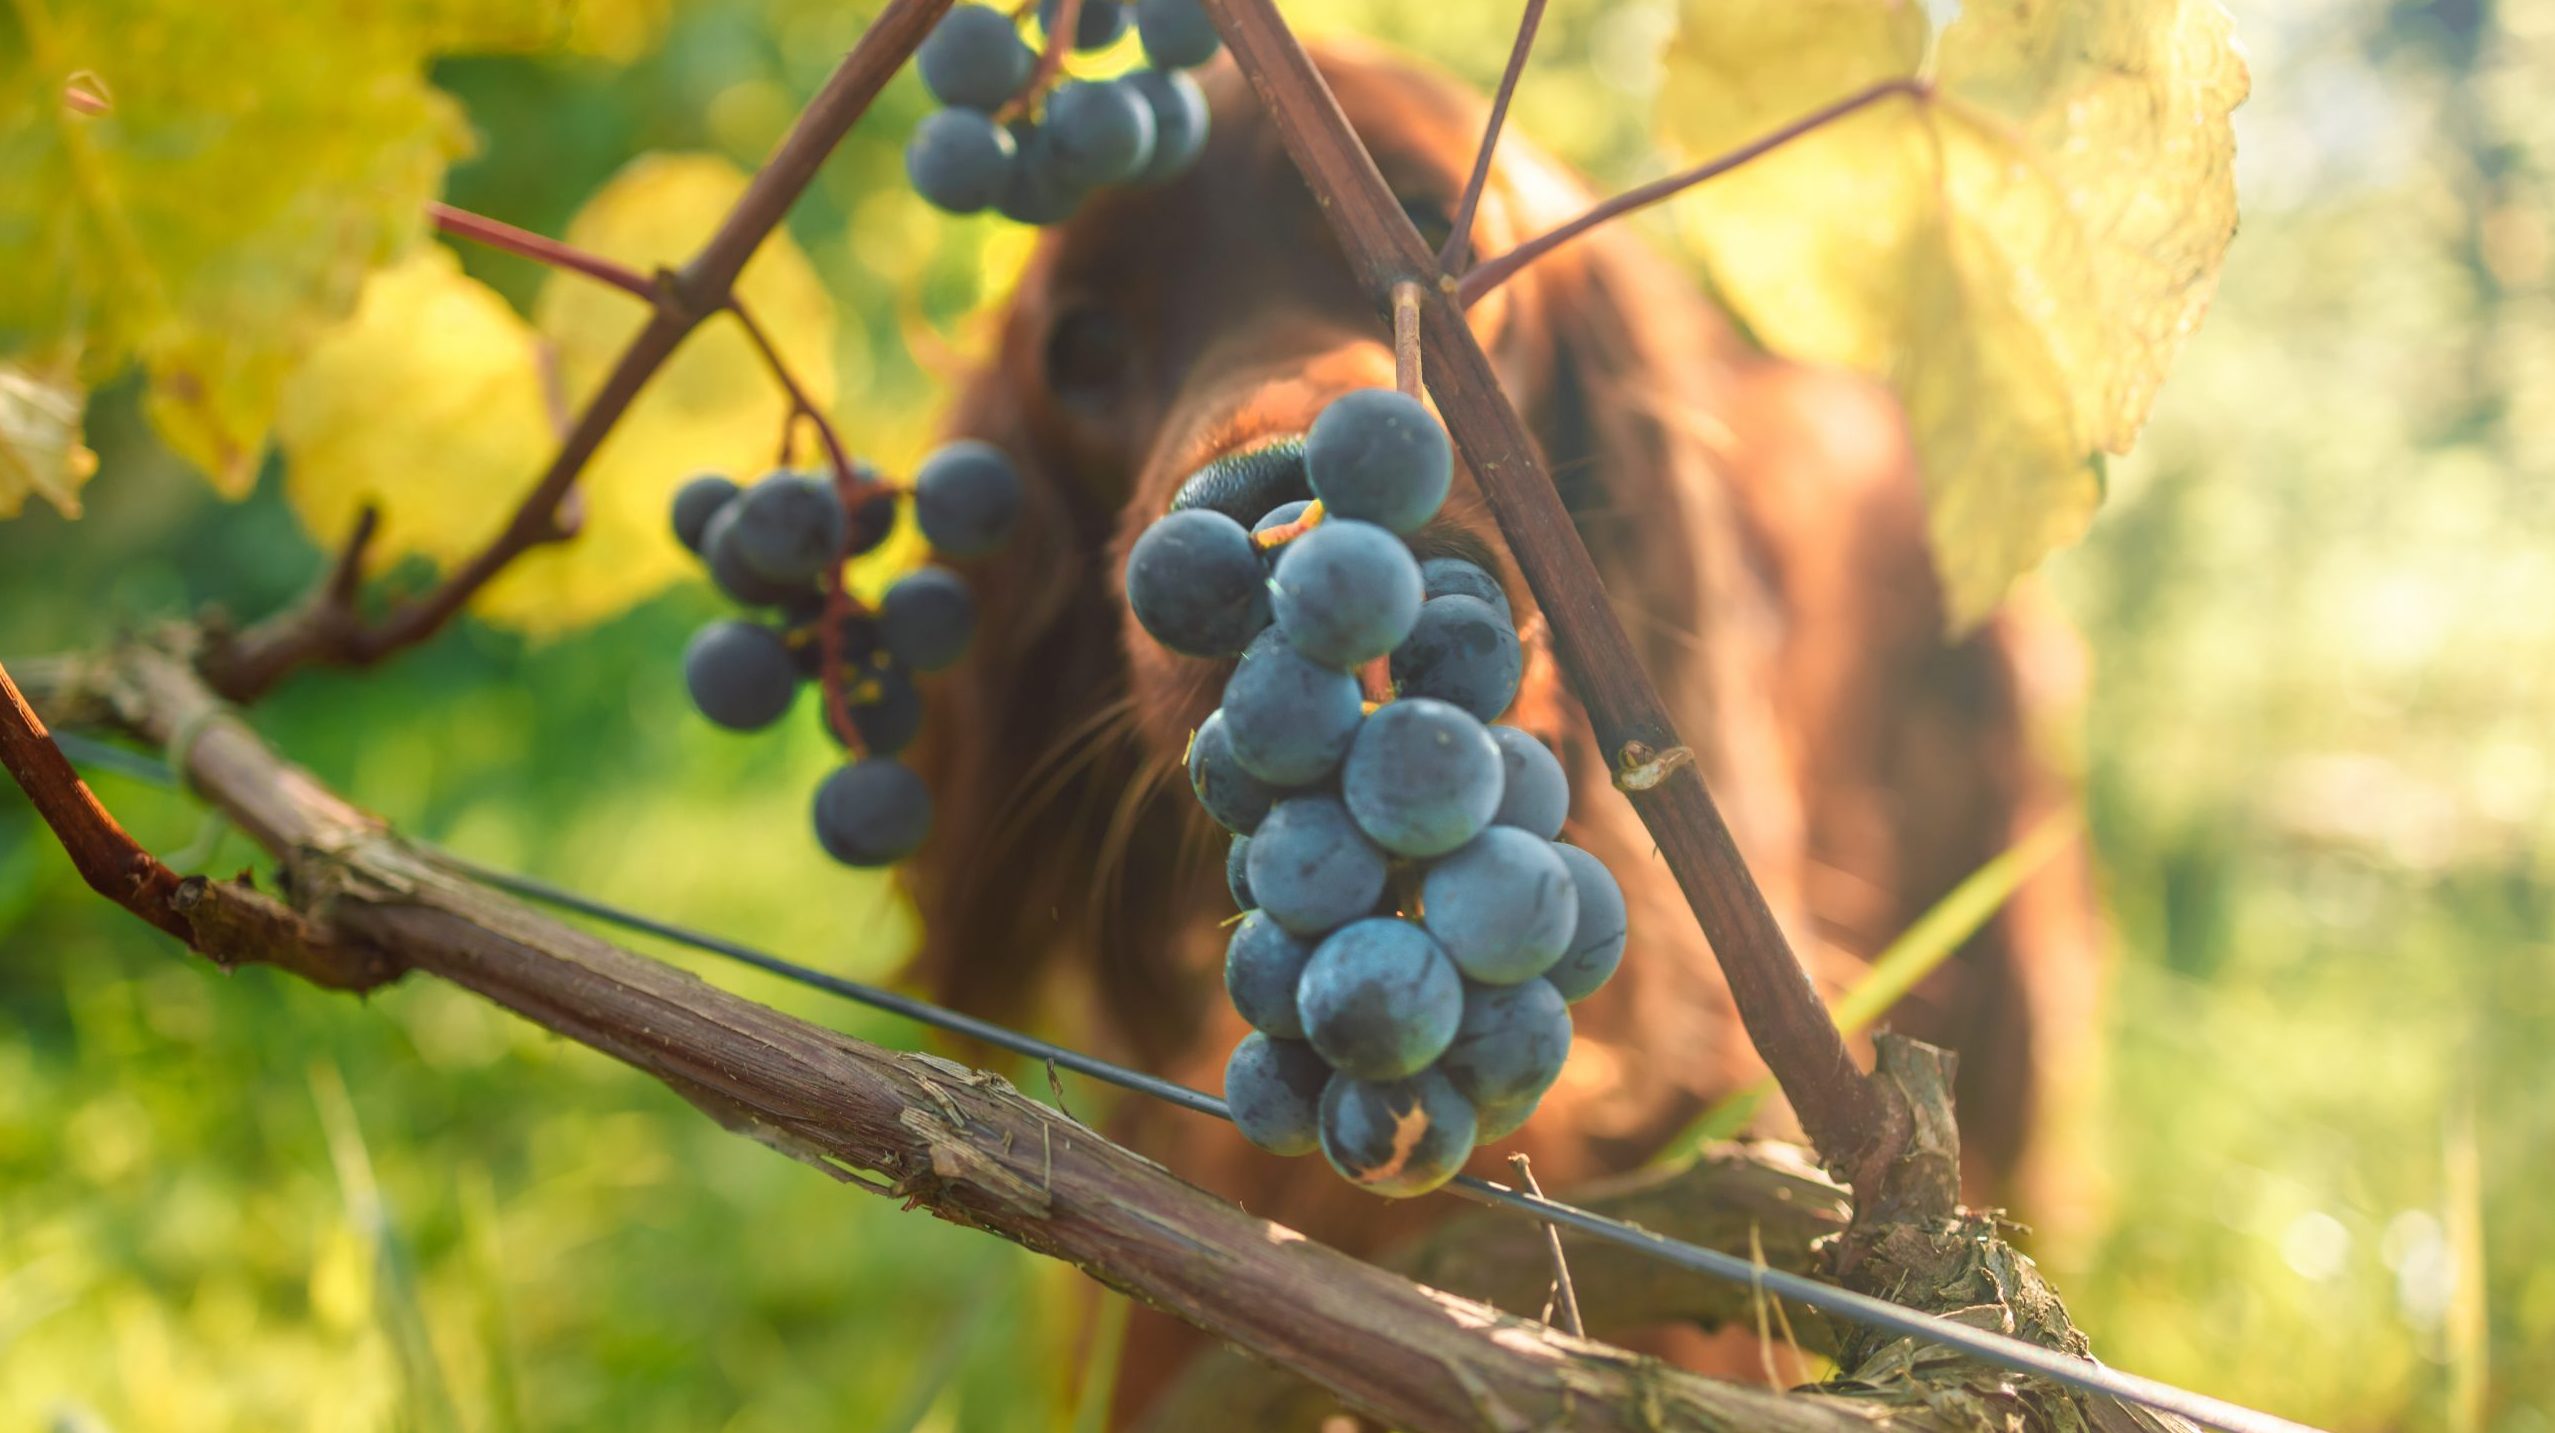 Dog sniffing grapes on the vine.